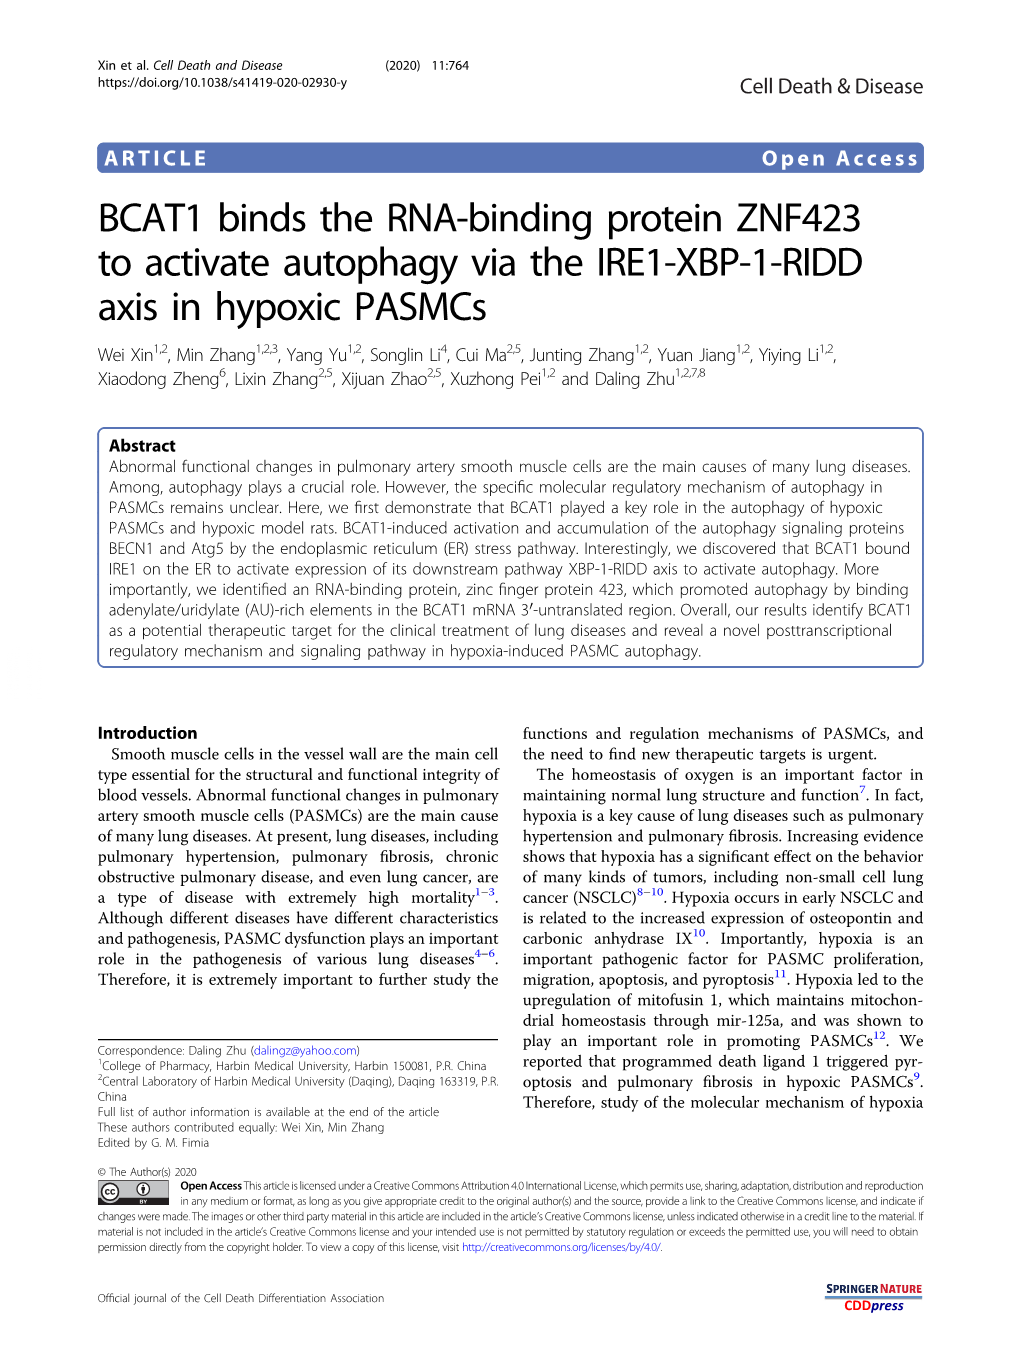 BCAT1 Binds the RNA-Binding Protein ZNF423 to Activate Autophagy Via the IRE1-XBP-1-RIDD Axis in Hypoxic Pasmcs